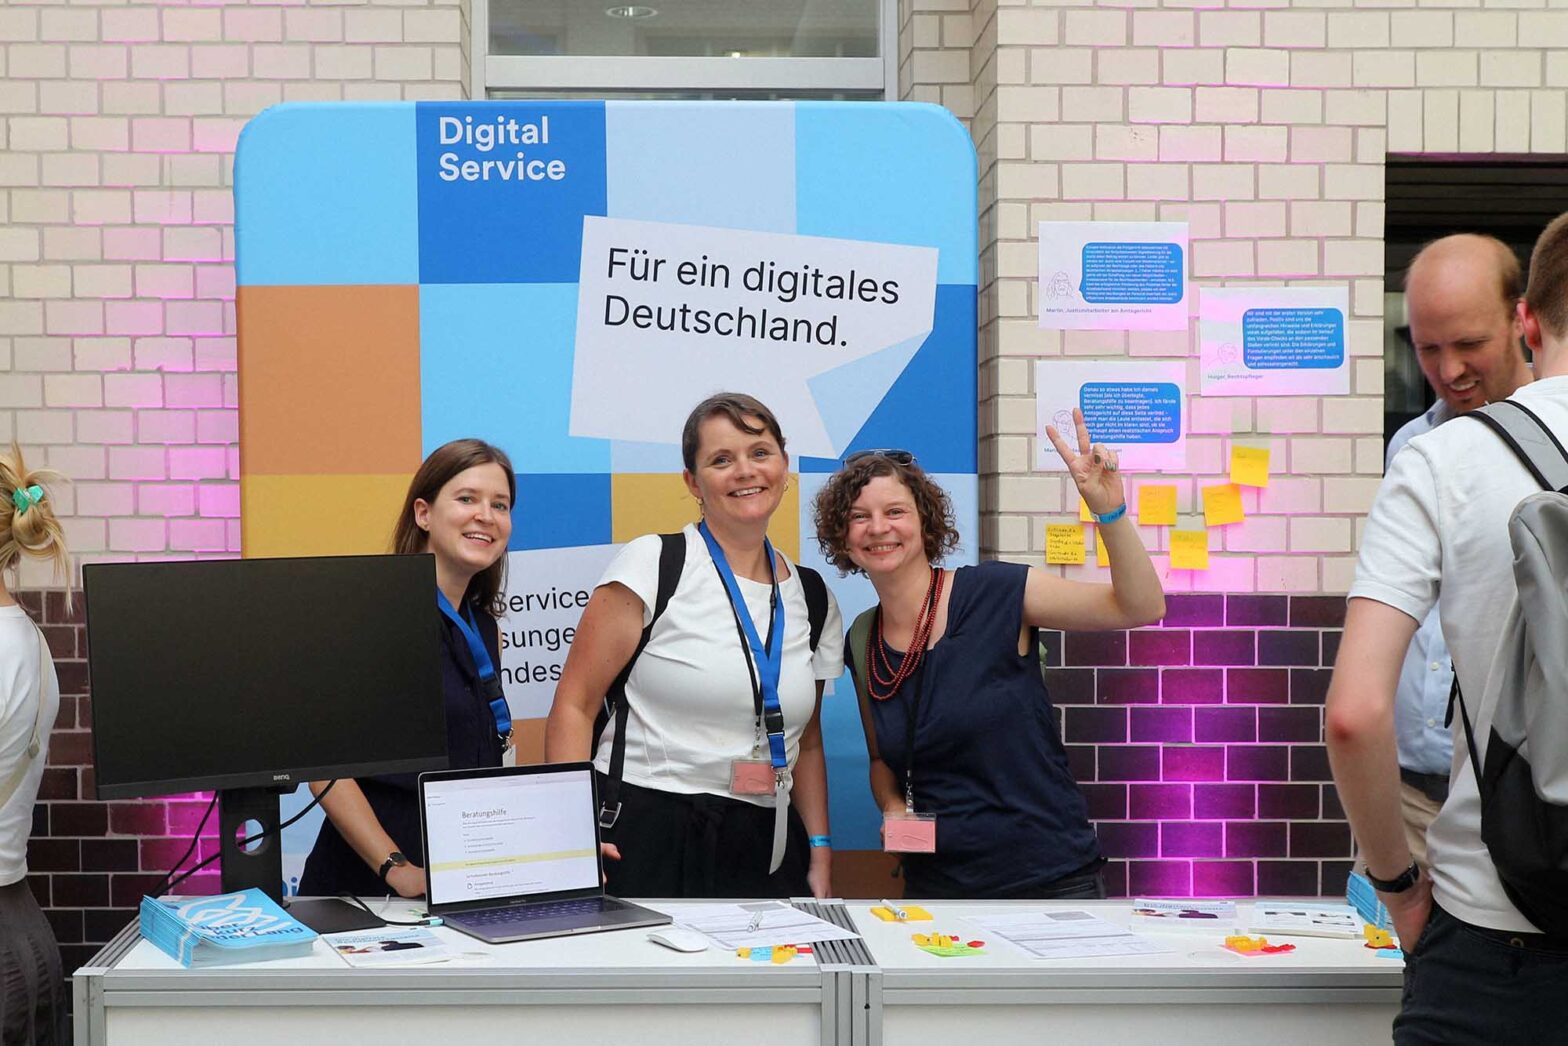 Three women with lighter skin standing at booth smiling – behind them is pop-up display with the logo of Digital Service and a big headline saying: “For a digital Germany”